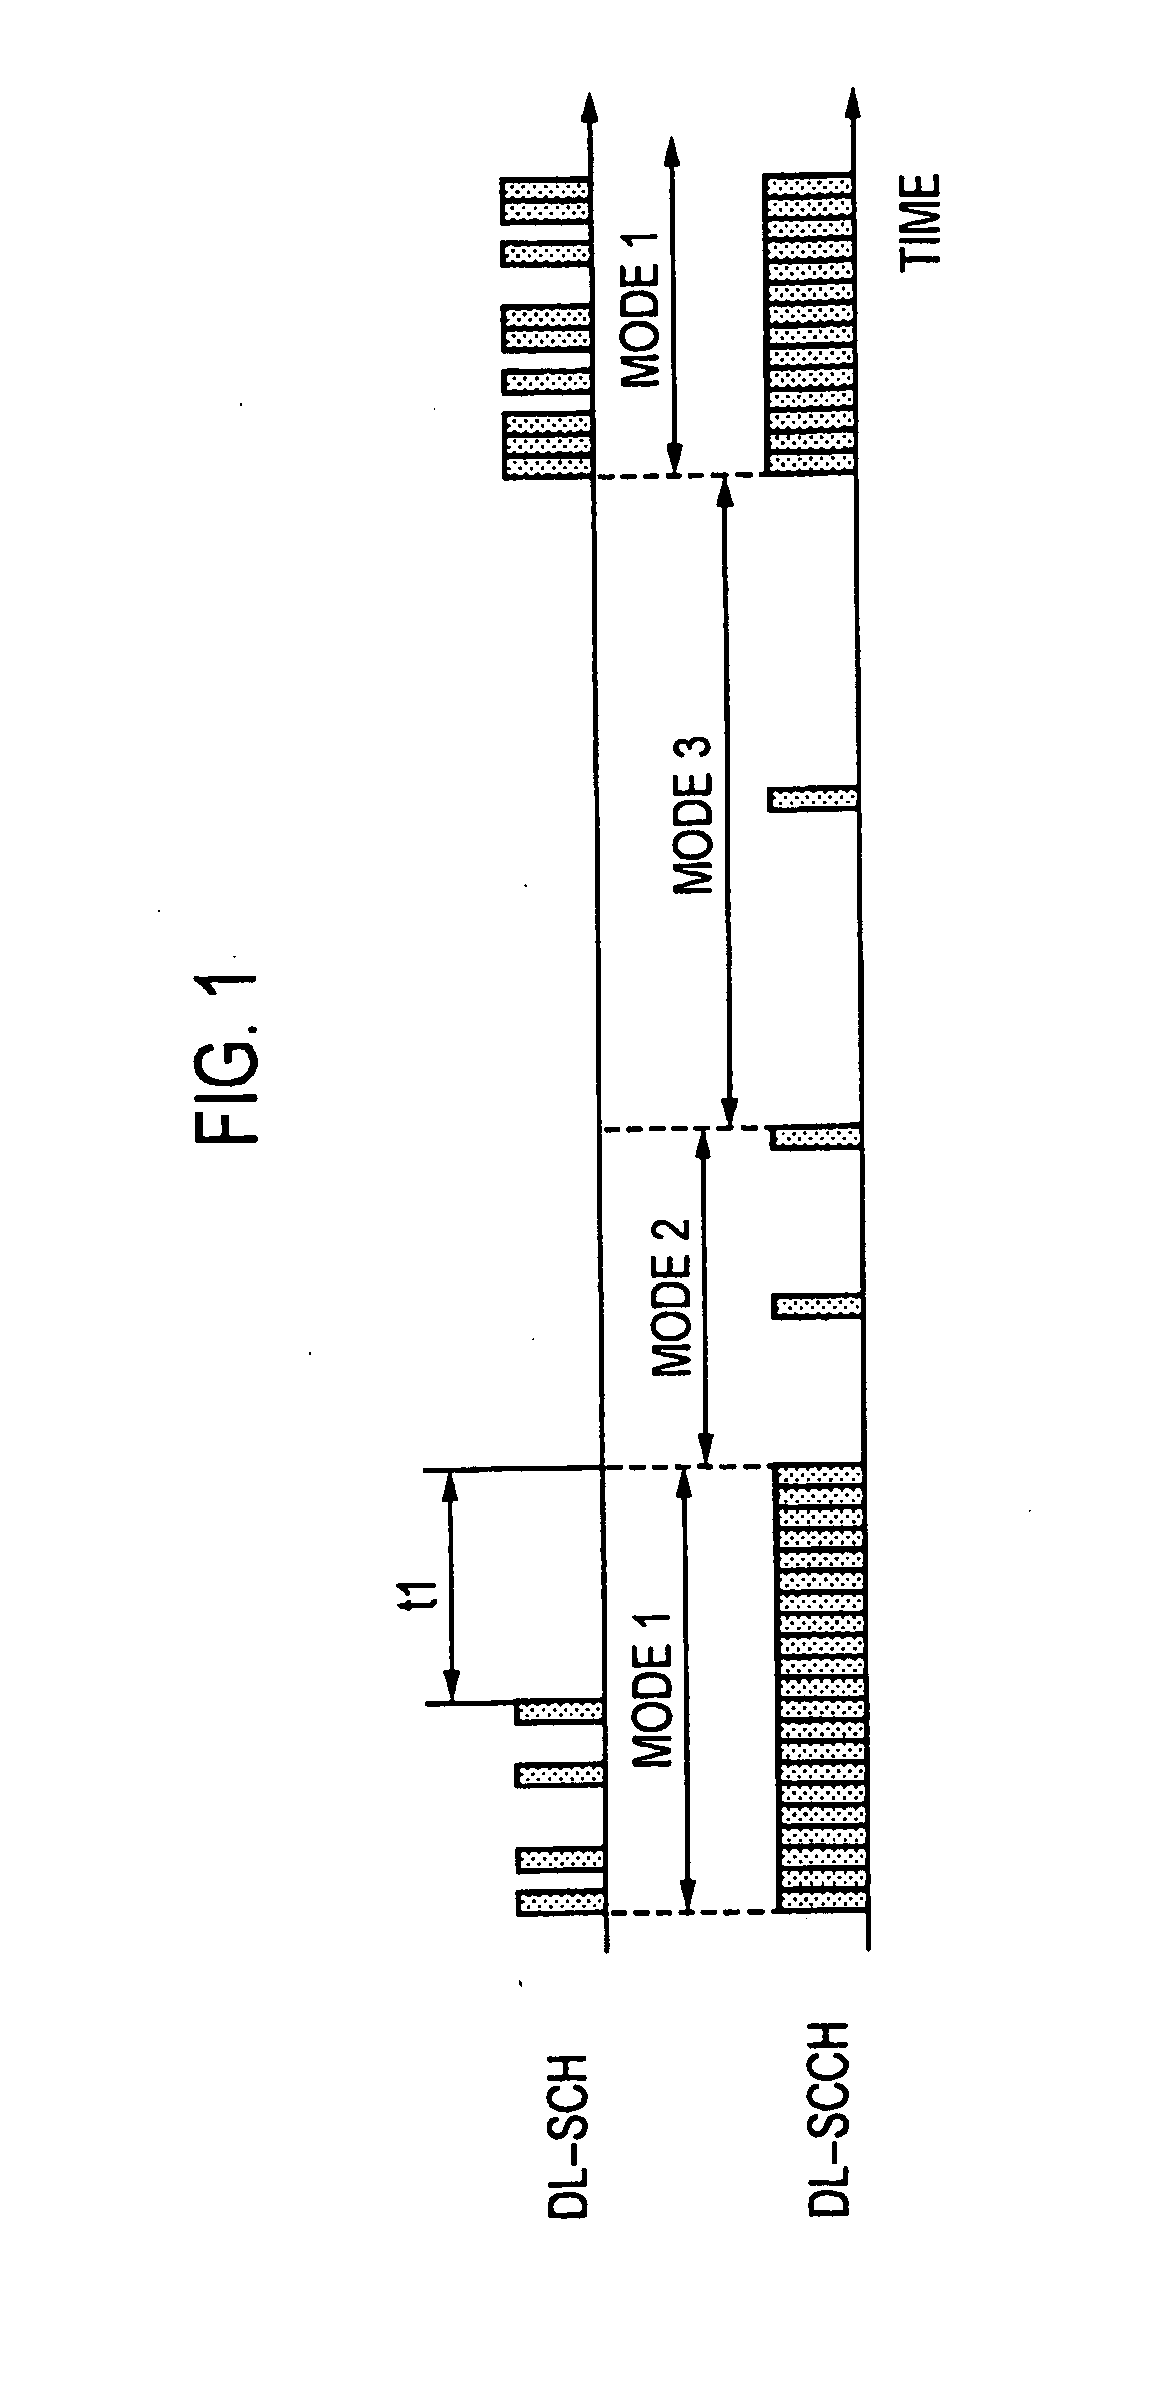 Base station, mobile station, synchronization control method, and IC chip